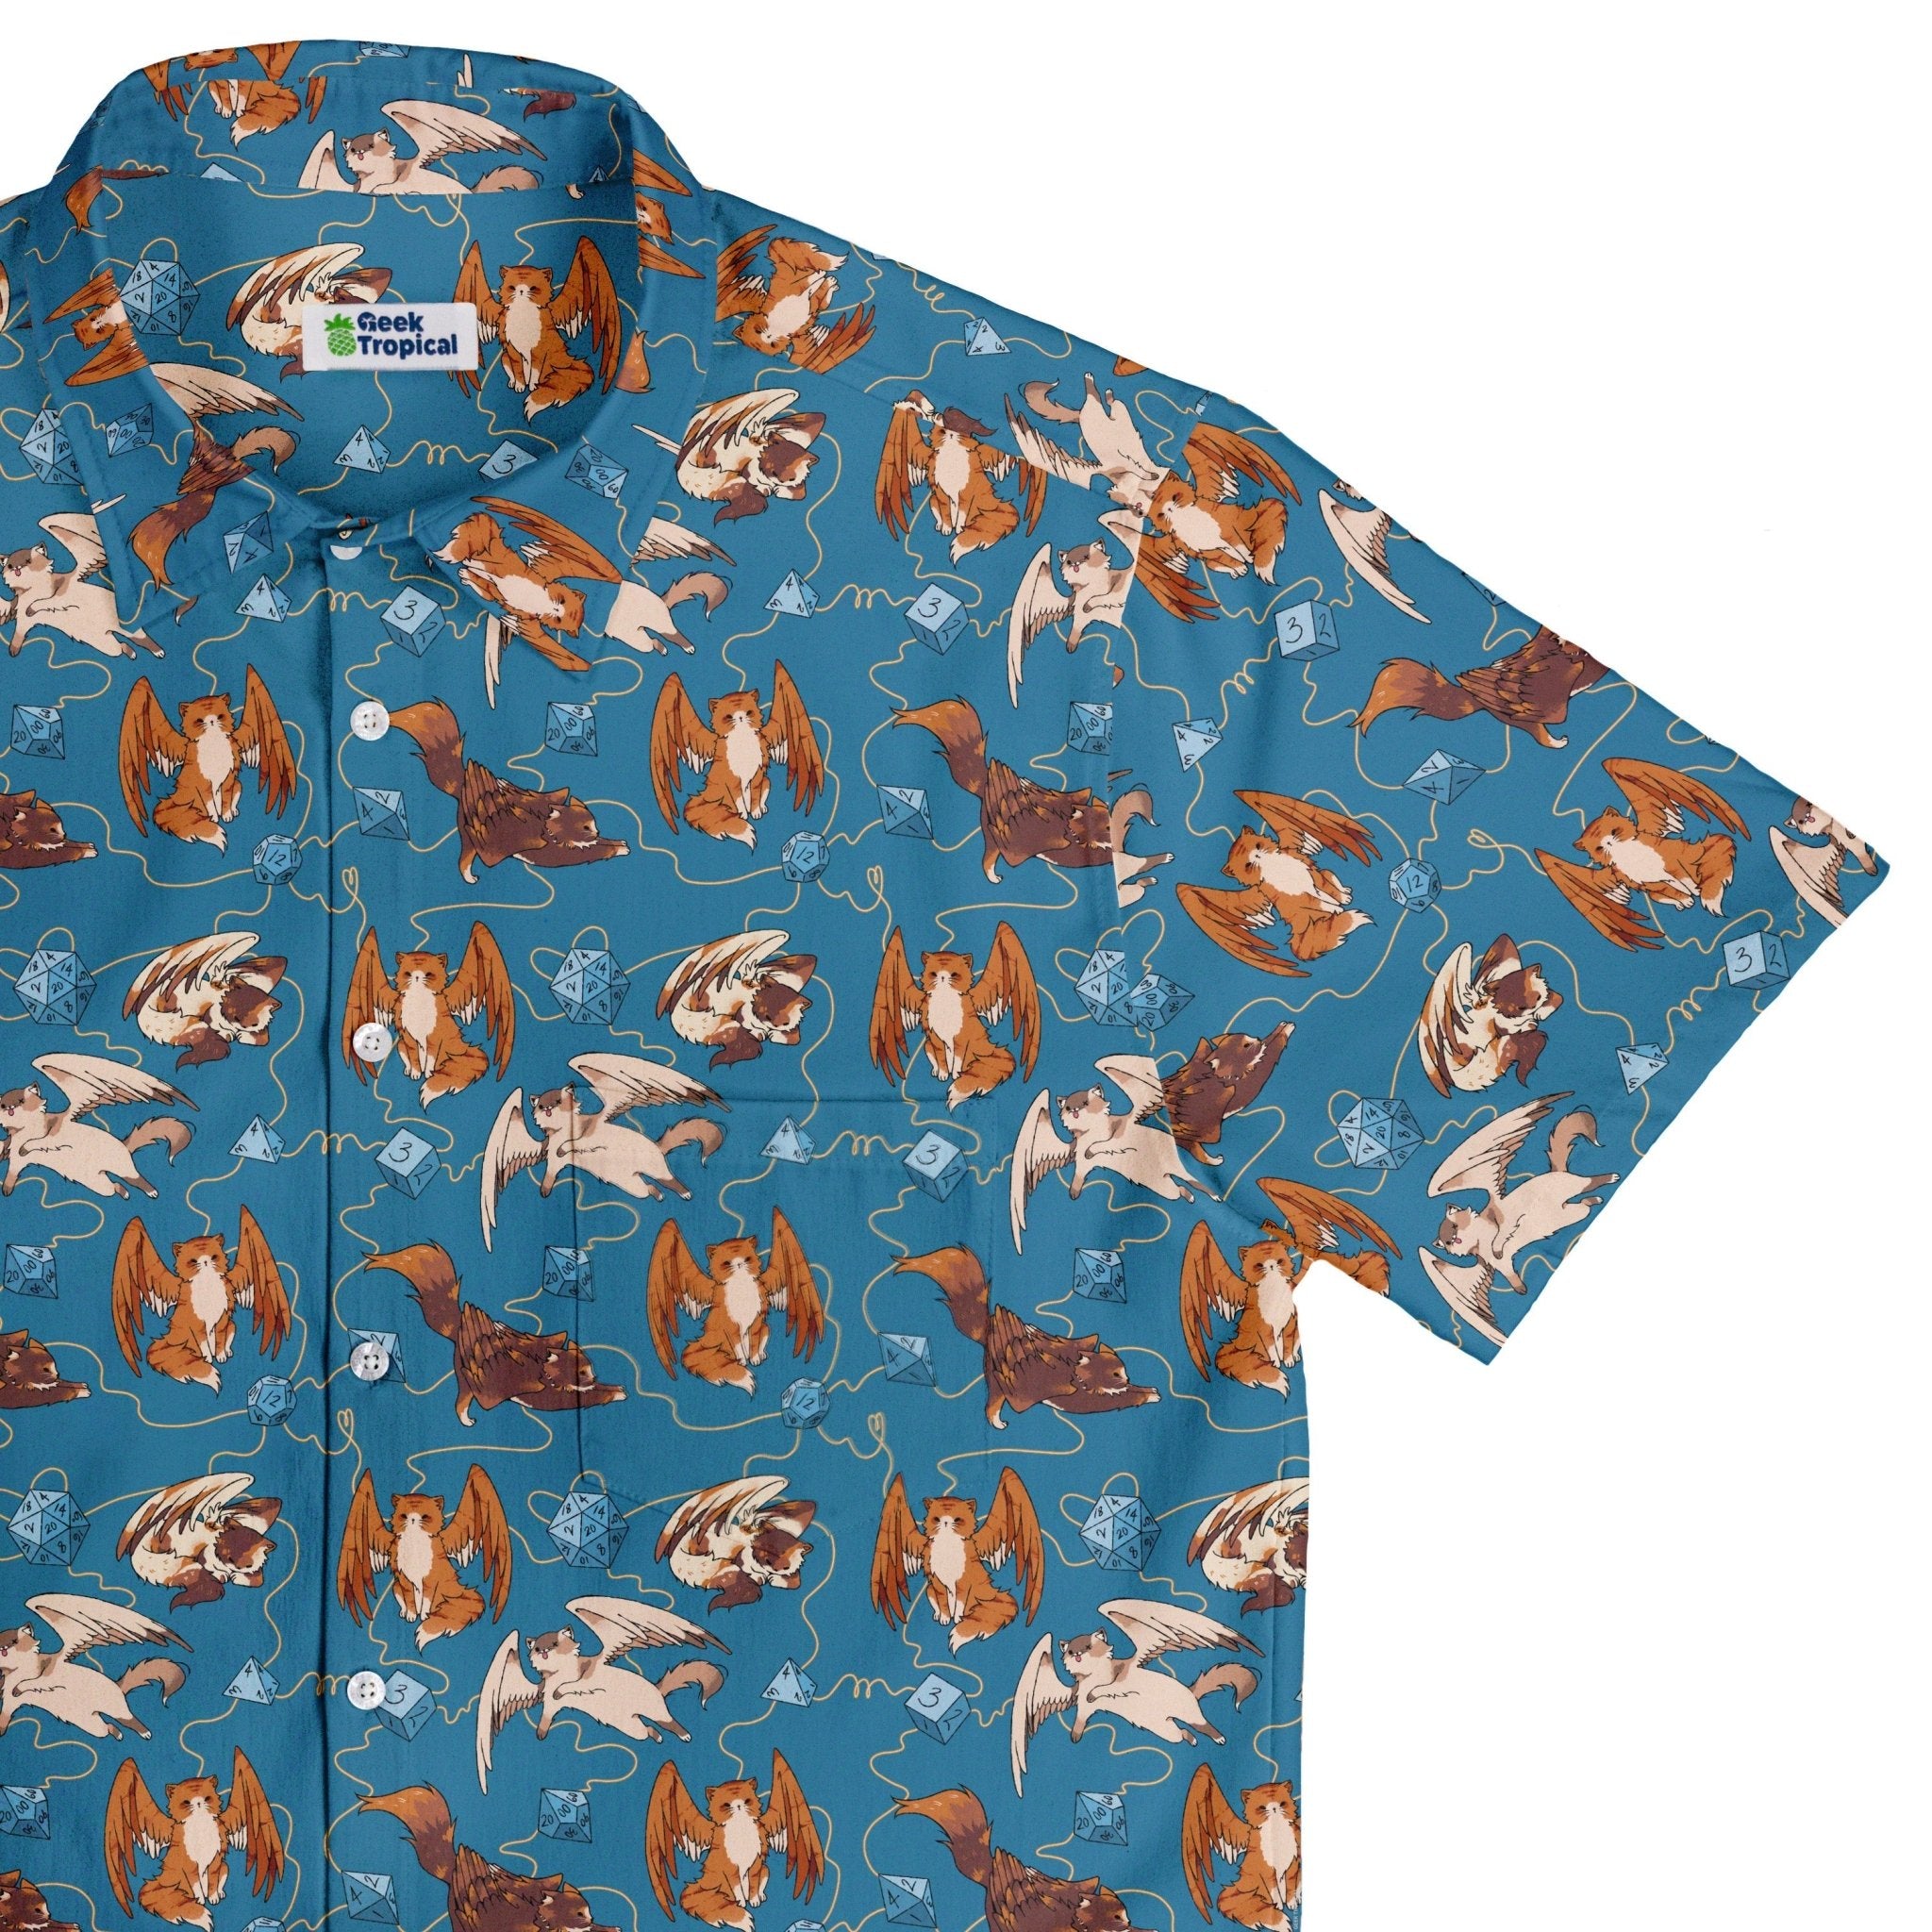 Dnd Tressym Familiars Button Up Shirt - adult sizing - Design by Ardi Tong - dnd & rpg print